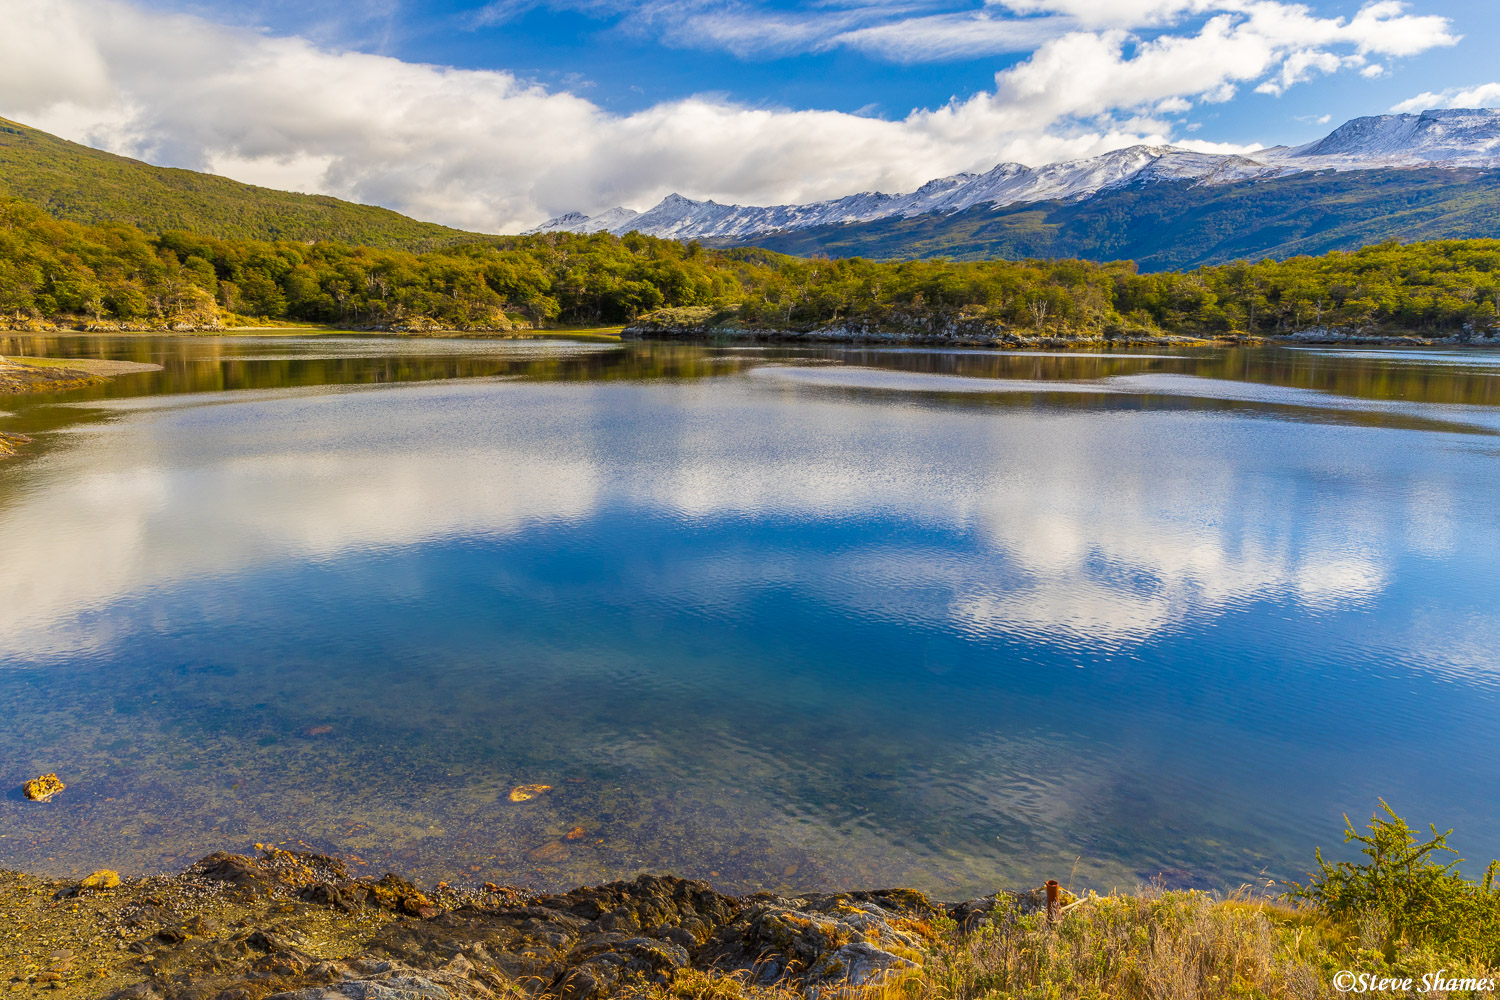 A nice lake and mountain scene at Tierra del Fuego National Park.